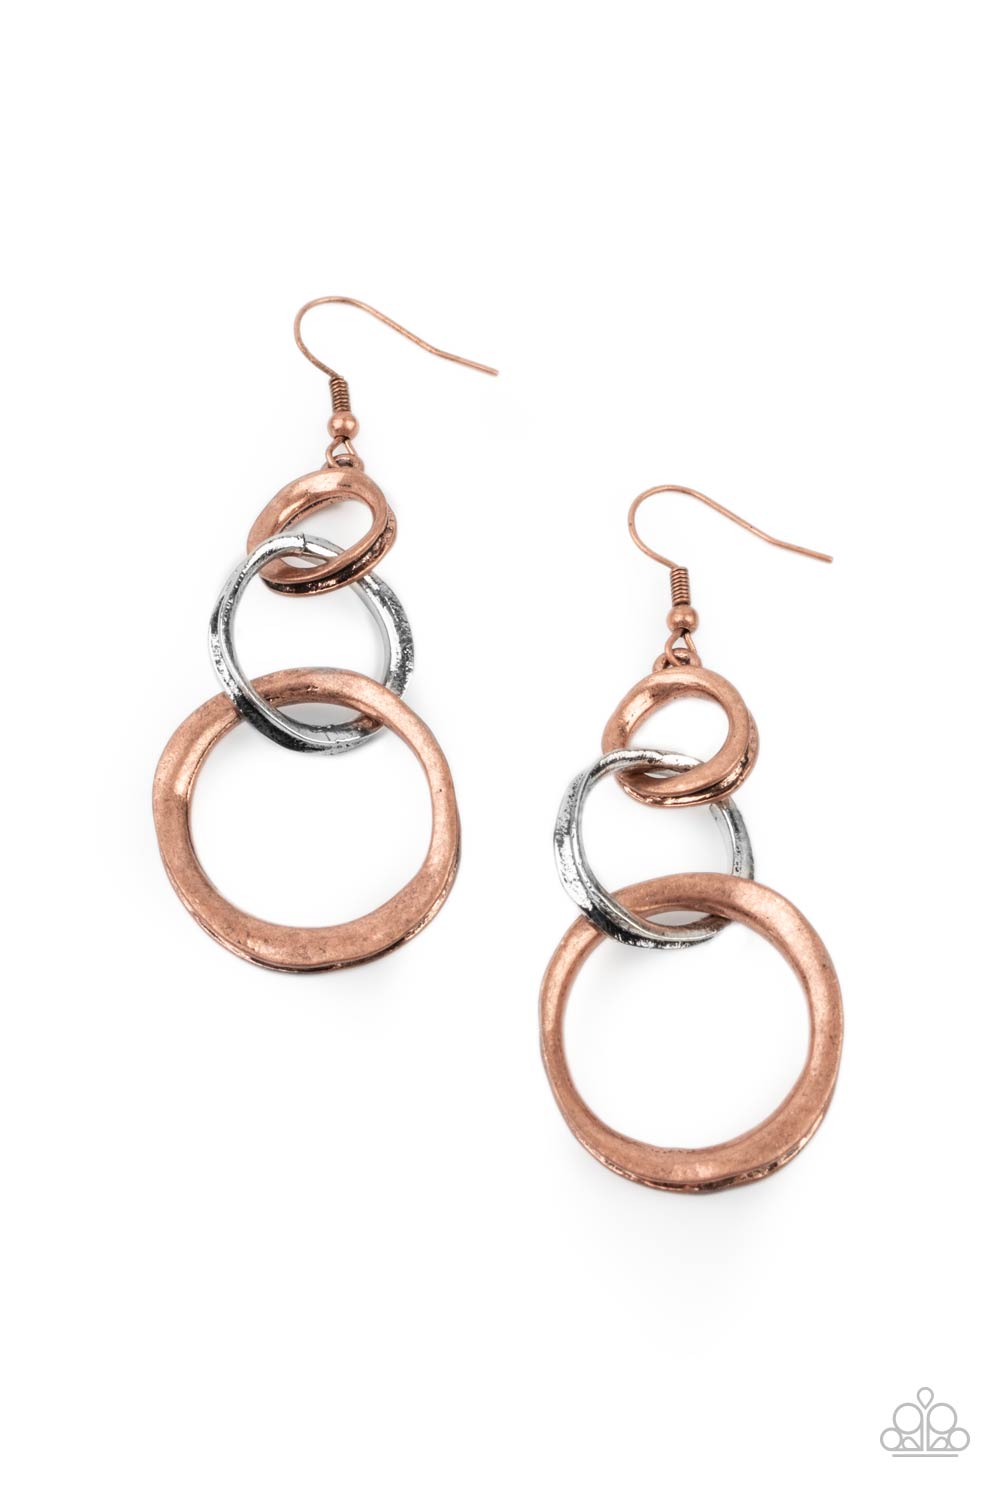 Paparazzi Accessories - Harmoniously Handcrafted #E460 - Copper Earrings